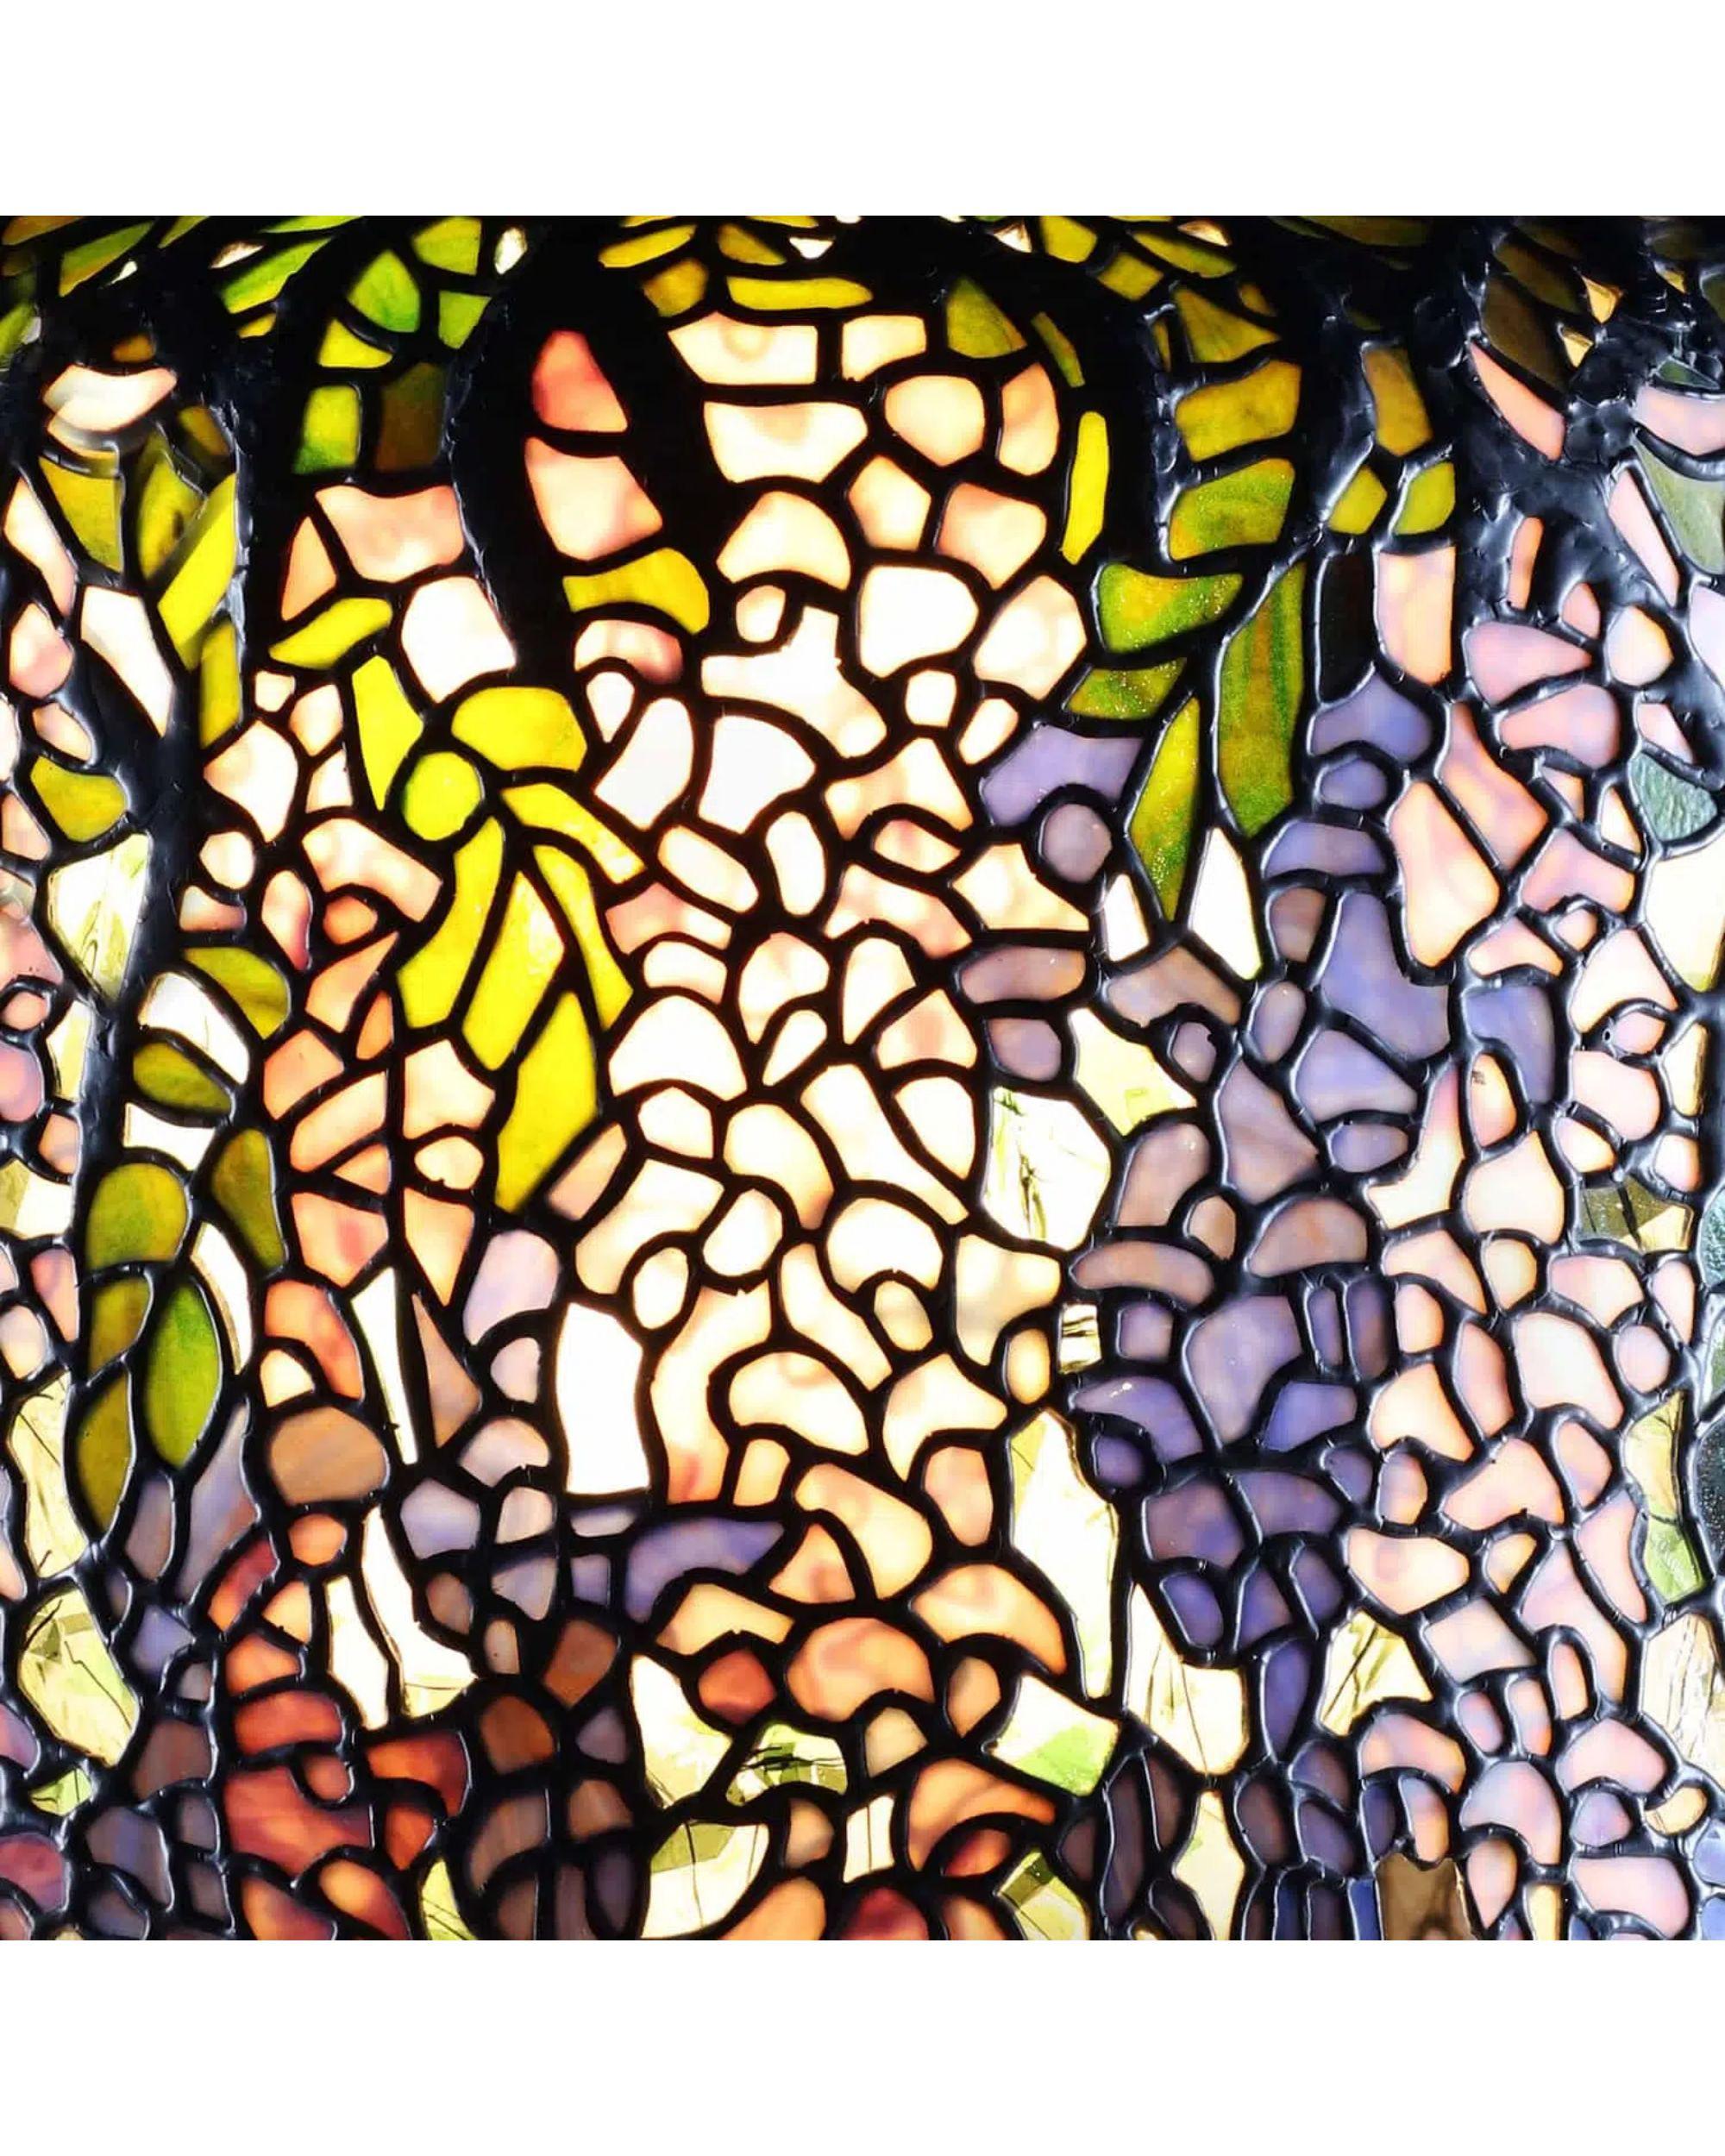 Wisteria’ Table Lamp after Tiffany Studio’s.

The Wisteria Large Tiffany Table Lamp is one of the most accomplished shade designs by Tiffany Studio’s. This extraordinary high-quality leaded glass shade comprises of almost 2000 individual pieces,